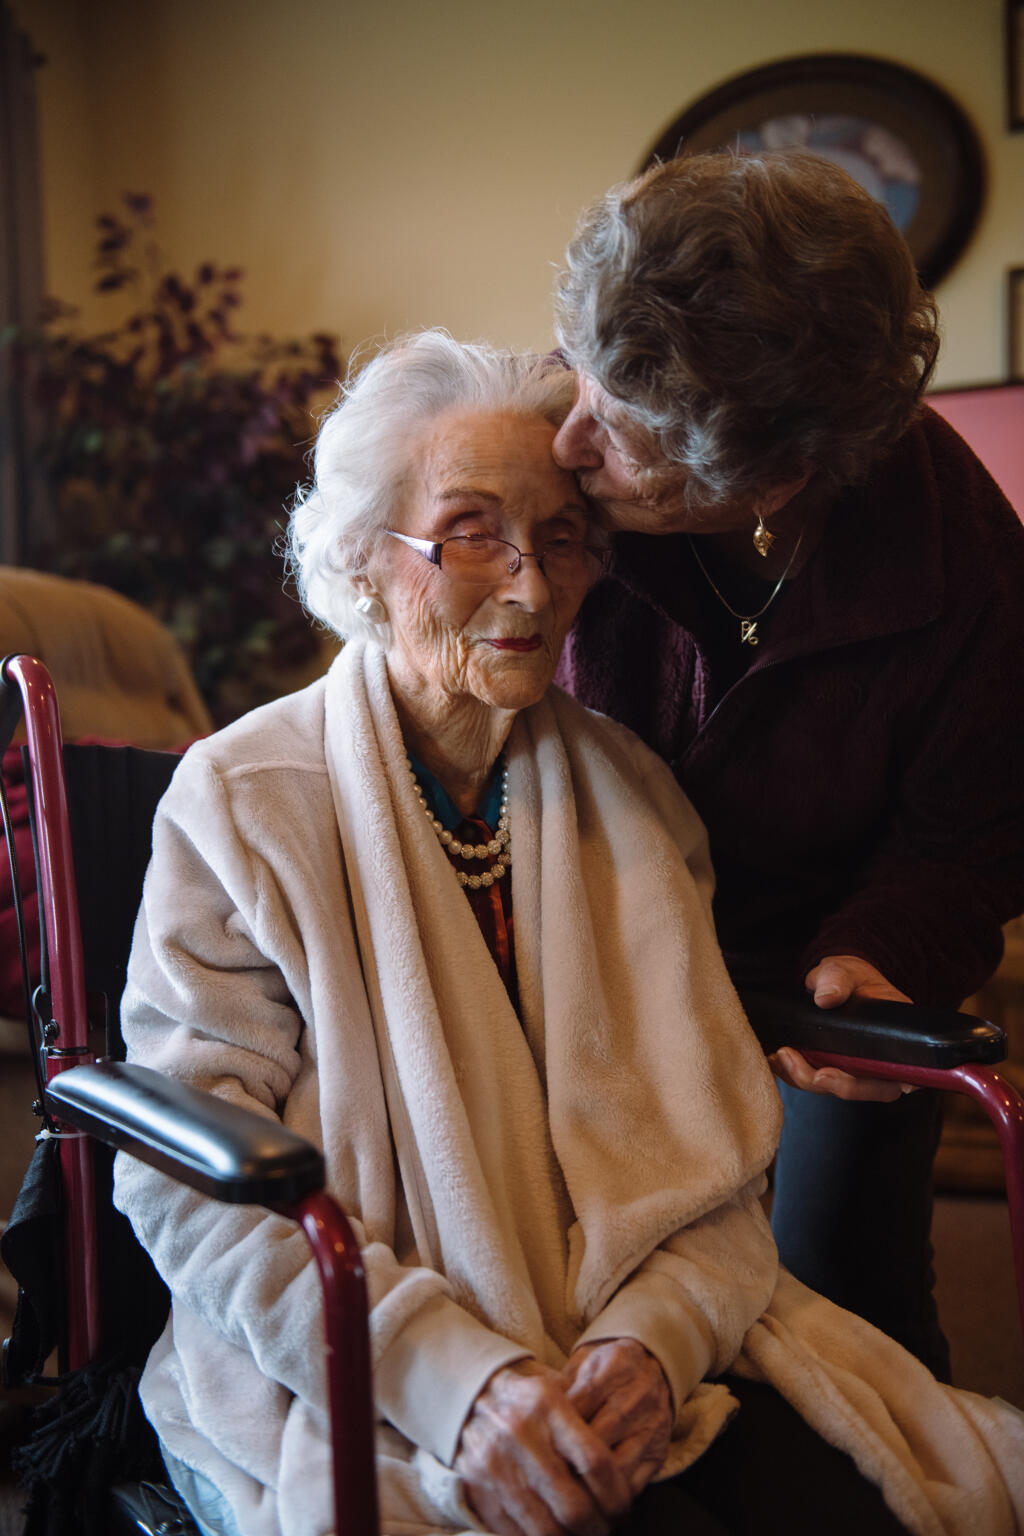 Evelyn Persico, 84, right, spends time with Edith Ceccarelli the day before her 116th birthday, at Holy Spirit Residential Care Home in Willits, Calif., Feb. 4, 2024. When the nation’s oldest person has a birthday, a California community makes sure to celebrate. (Alexandra Hootnick/The New York Times)